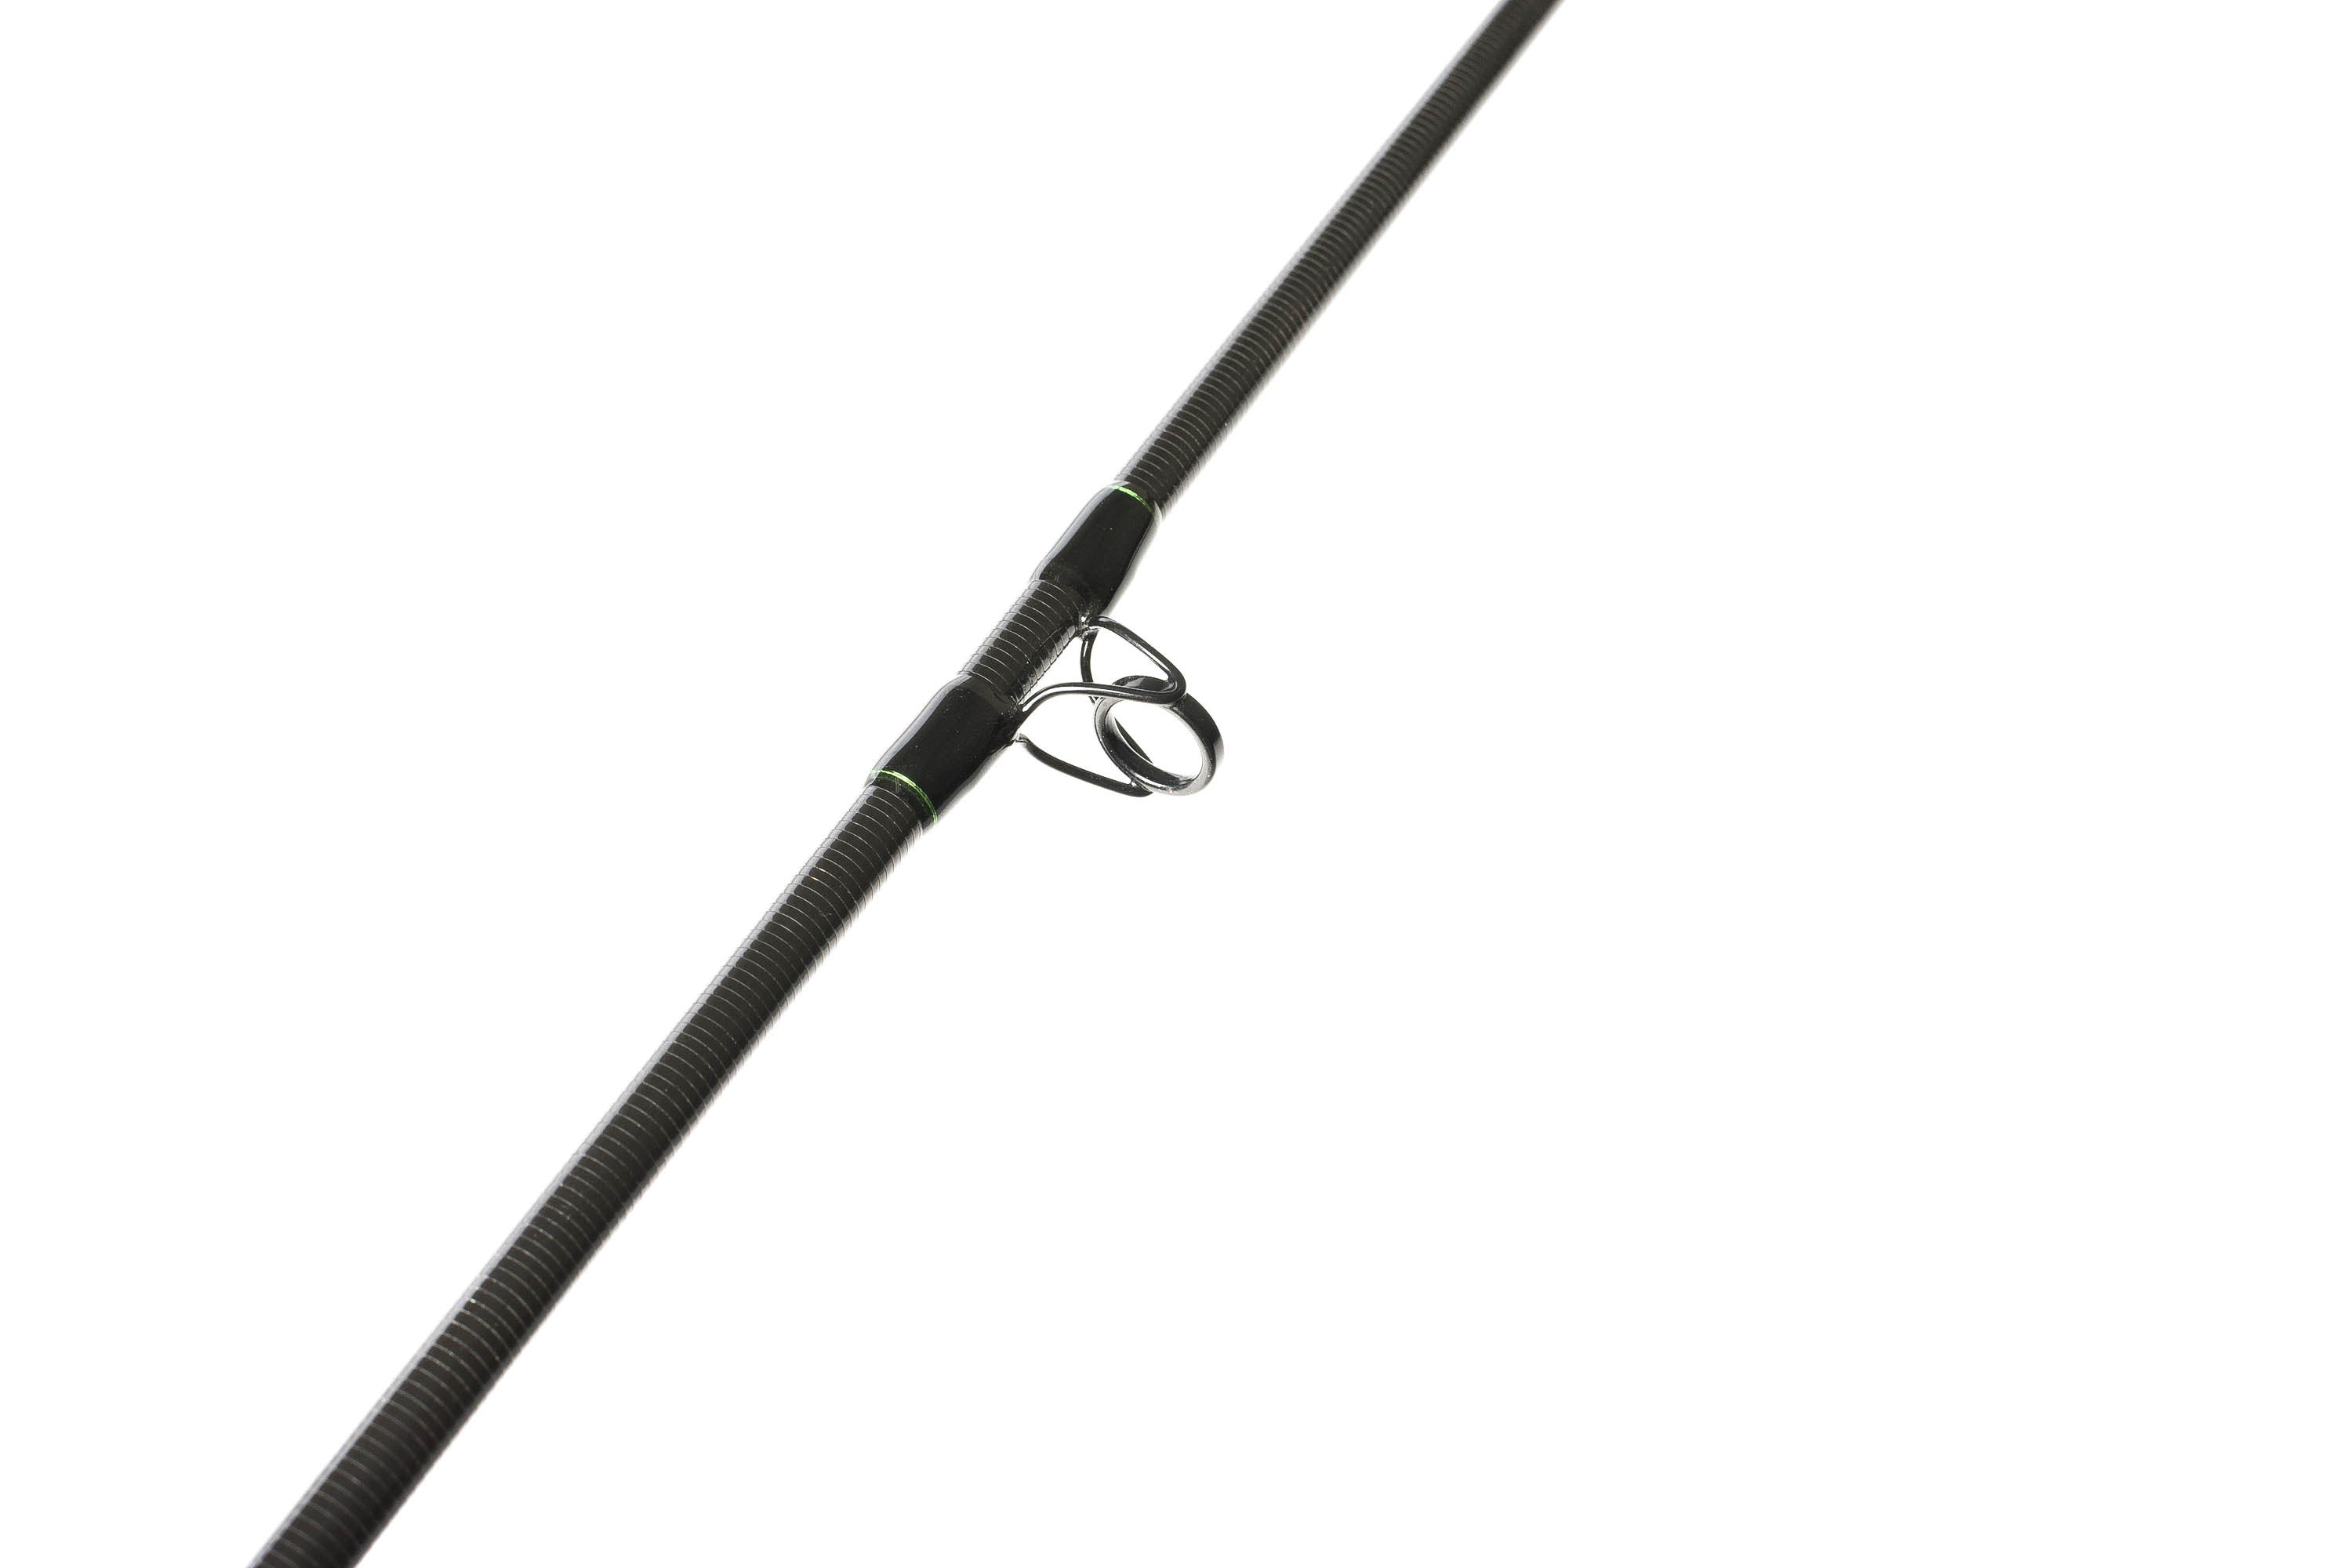 2xfly rods for sale in Sidney, British Columbia Classifieds